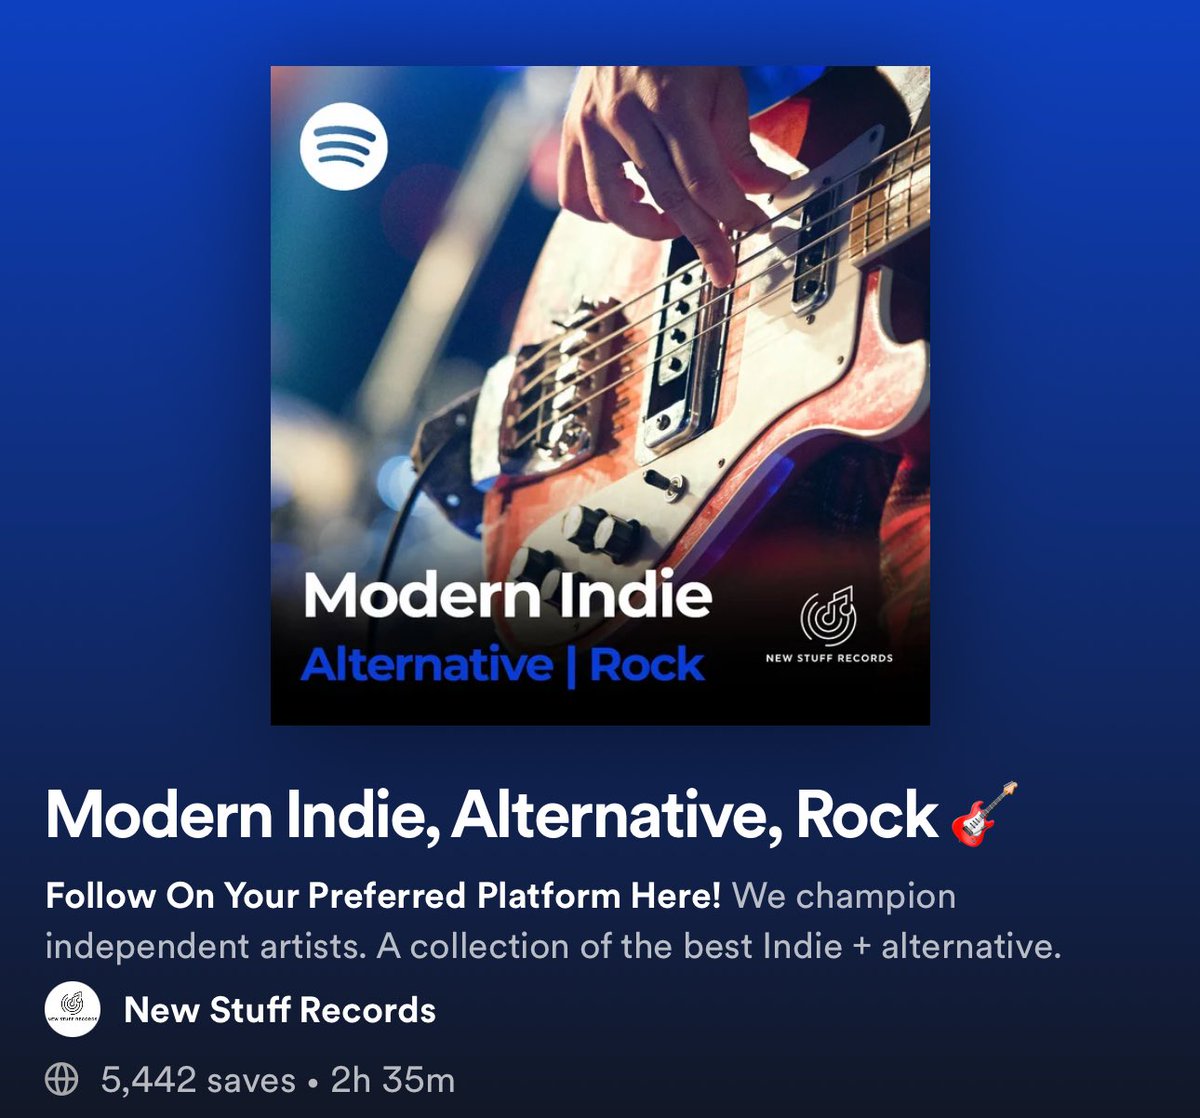 URGENT 24H OPPORTUNITY #2 I need 10 MORE indie/alternative/rock independent bands for my Modern Indie playlist, insane growth recently! 📈 To be considered 1) listen to my track ‘Taking Over’ 2) say what you think of it 3) and leave your link to your bands song submission in the